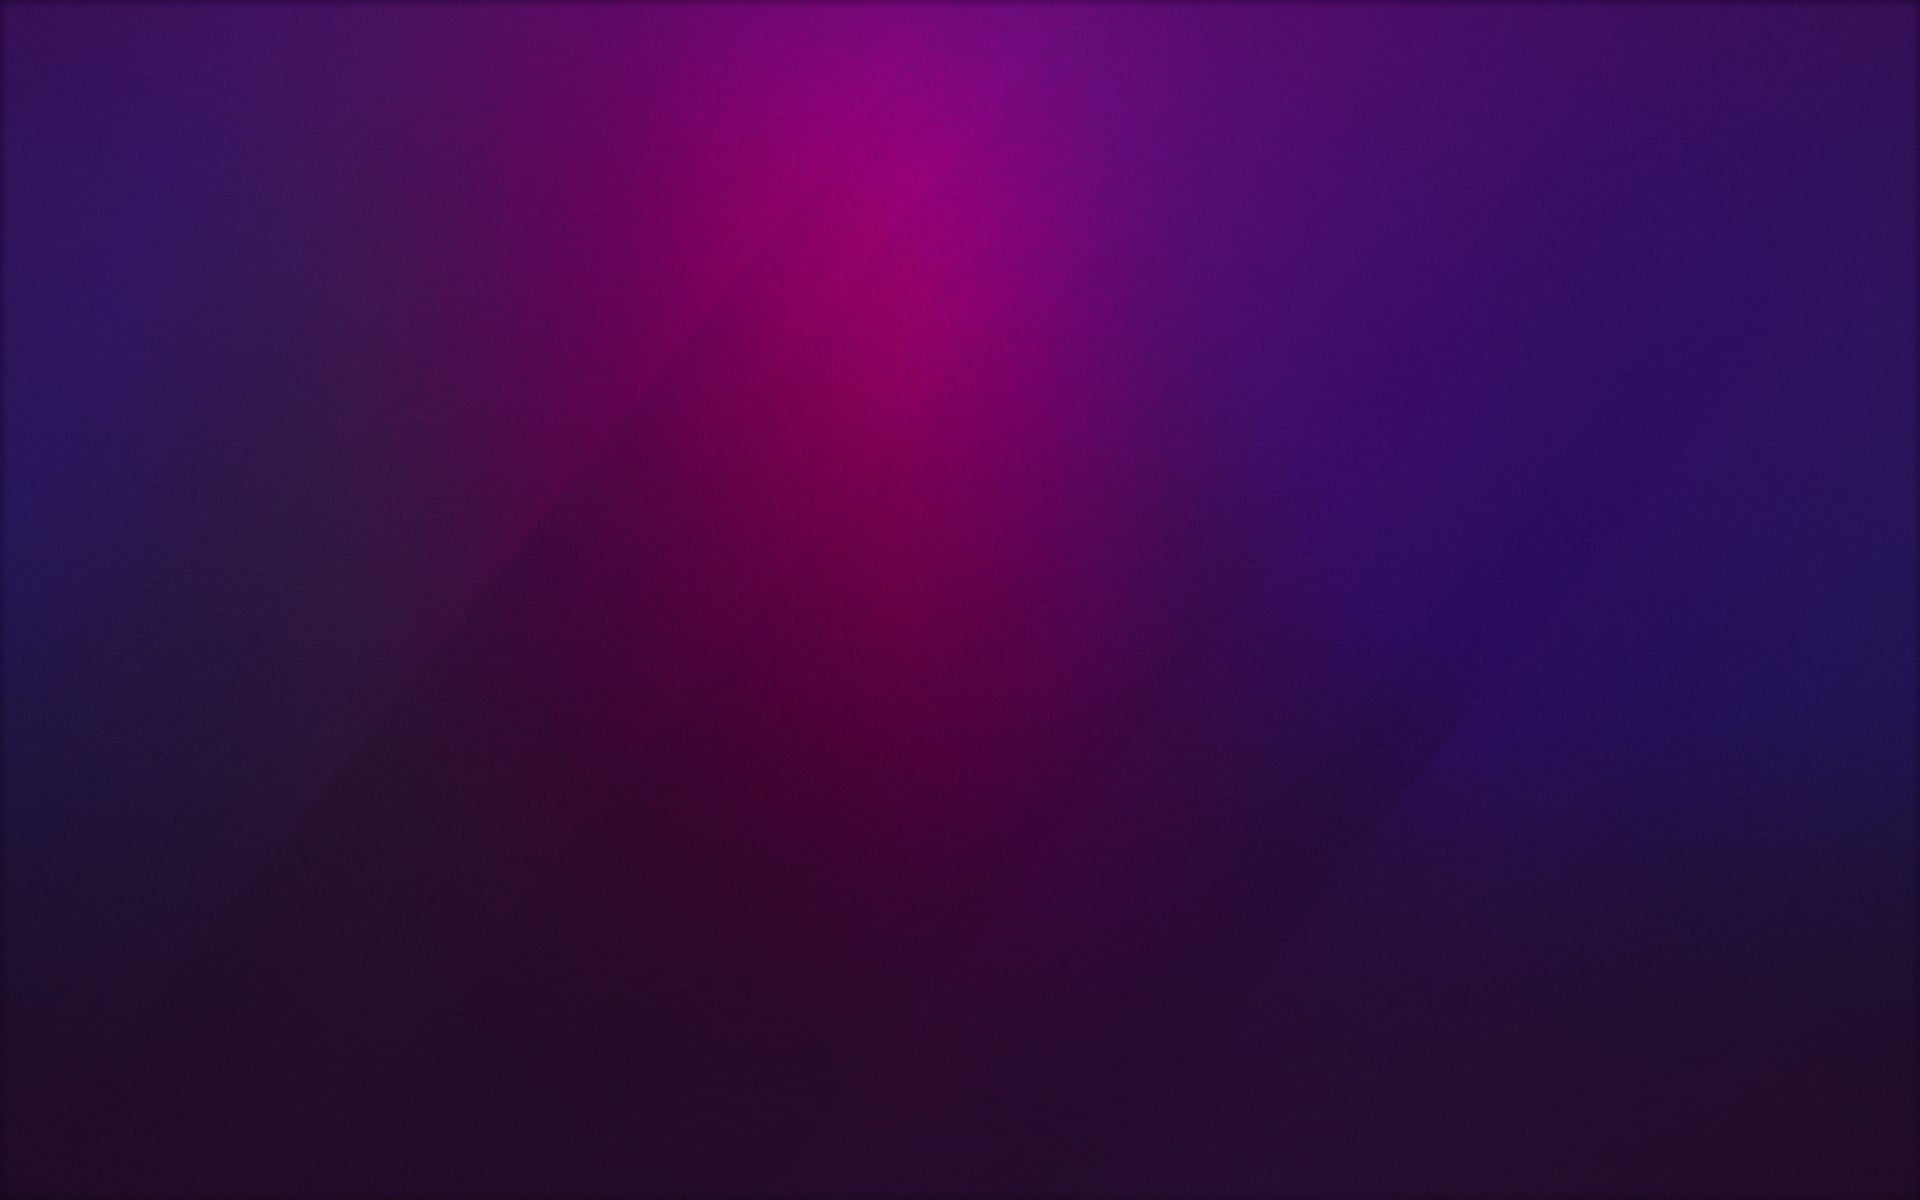 abstract, 3D, purple, pink